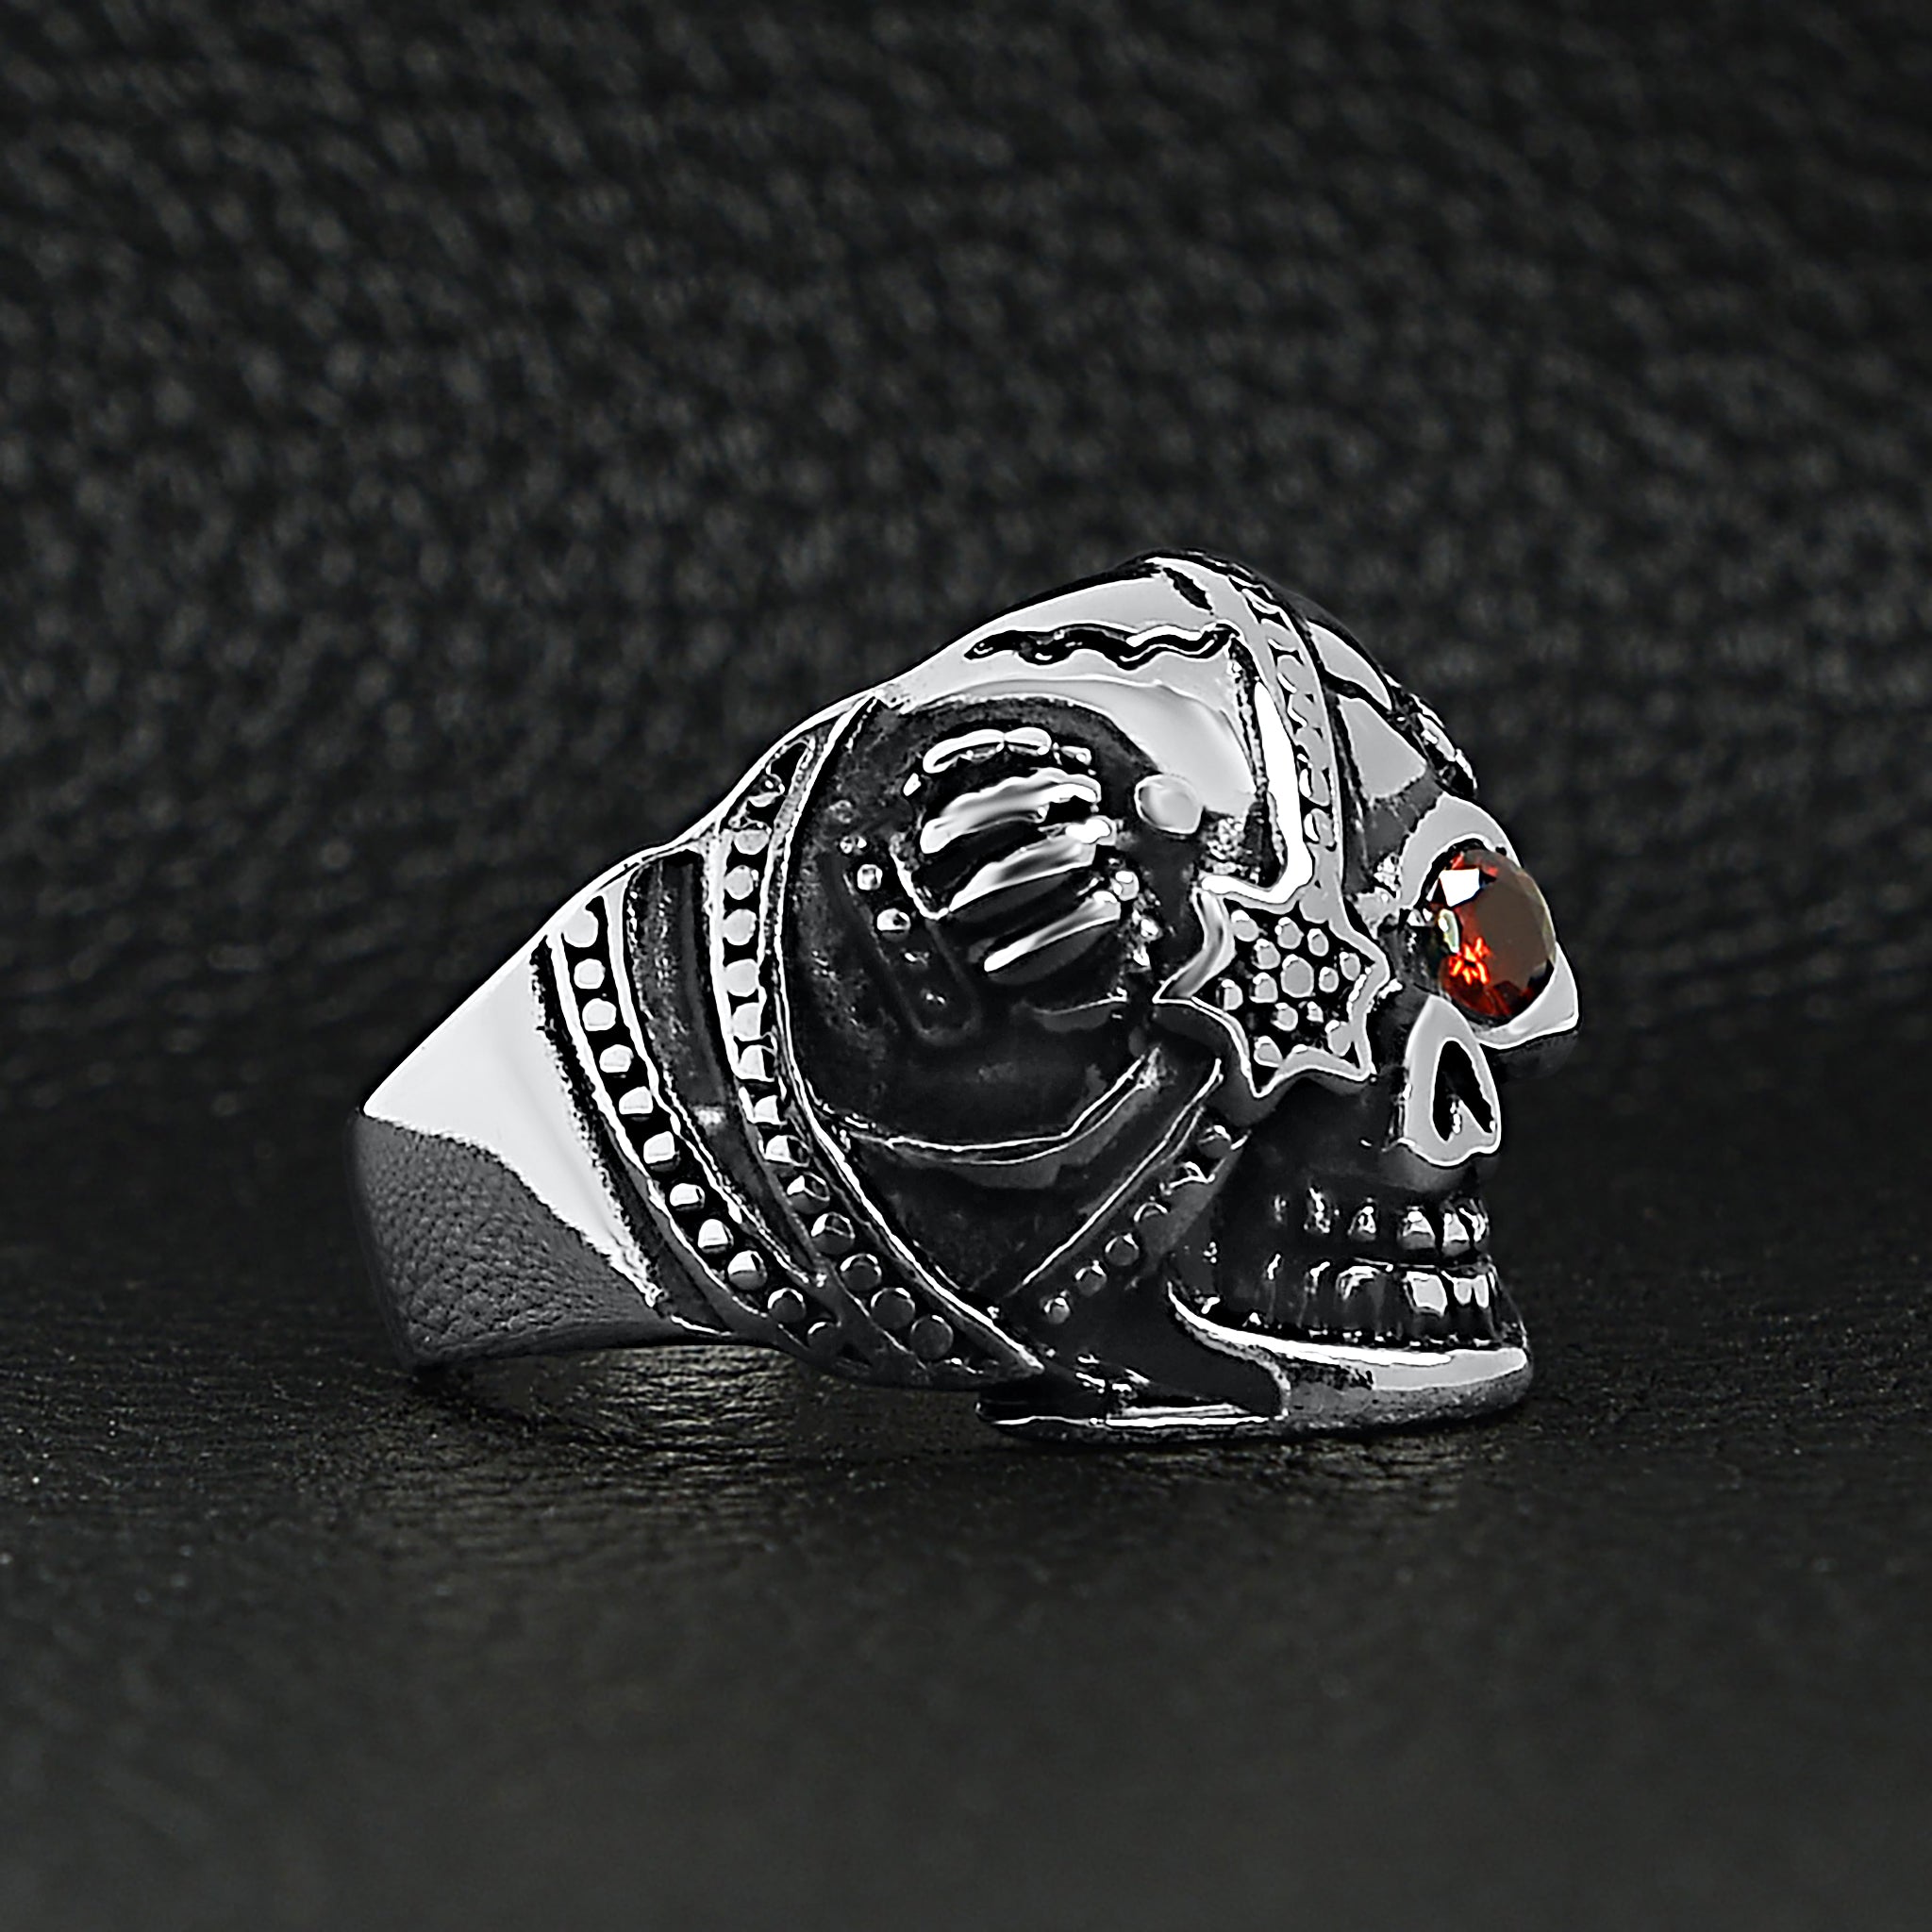 Stainless Steel Skull Ring with Red CZ Eye and Eyepatch - Unique and Stylish Jewelry for Men - Jewelry & Watches - Bijou Her -  -  - 